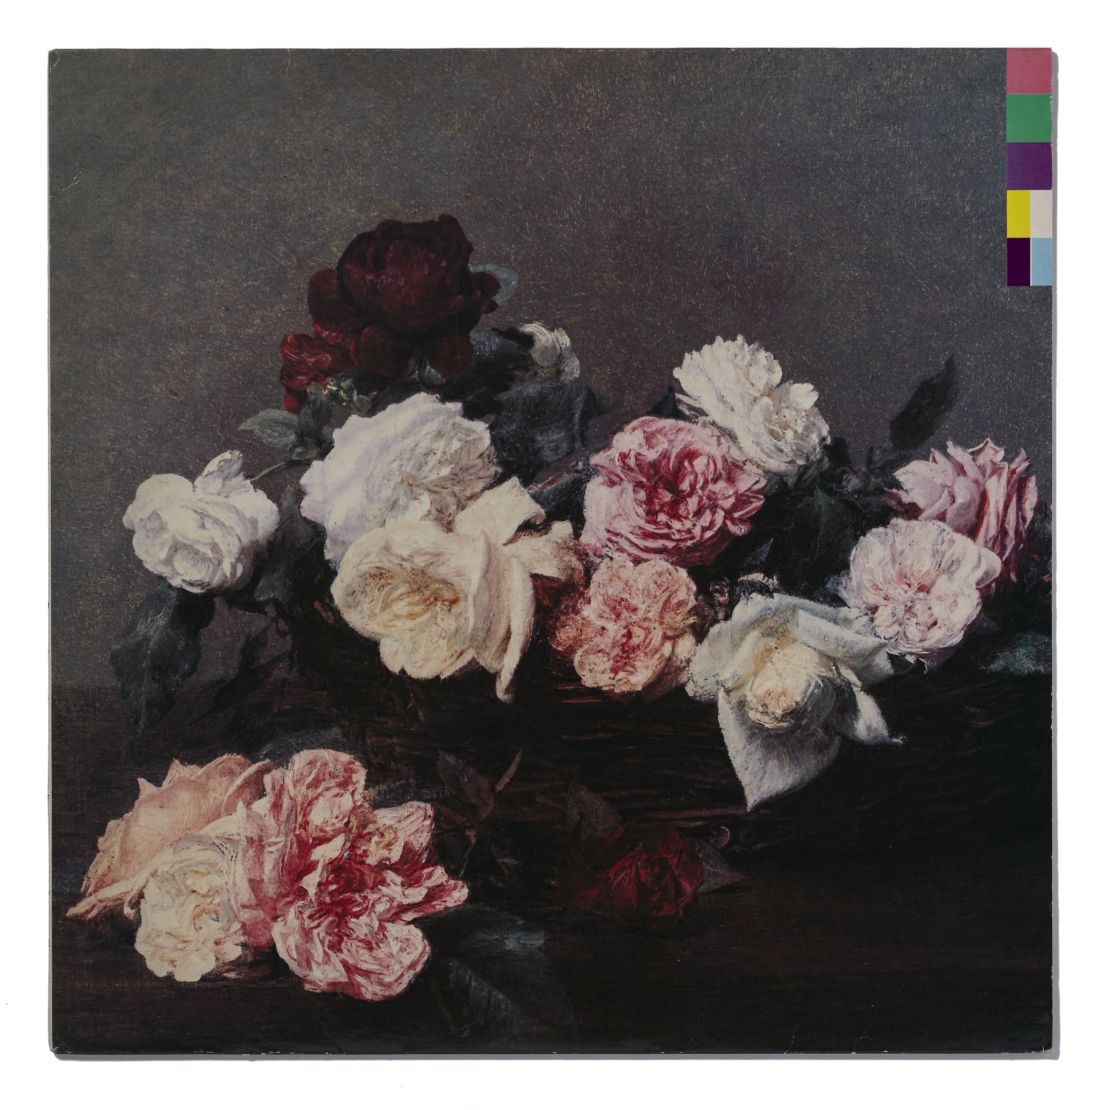 New Order, "Power, Corruption & Lies." Featuring 'A Basket of Roses' by Henri Fantin-Latour, 1890